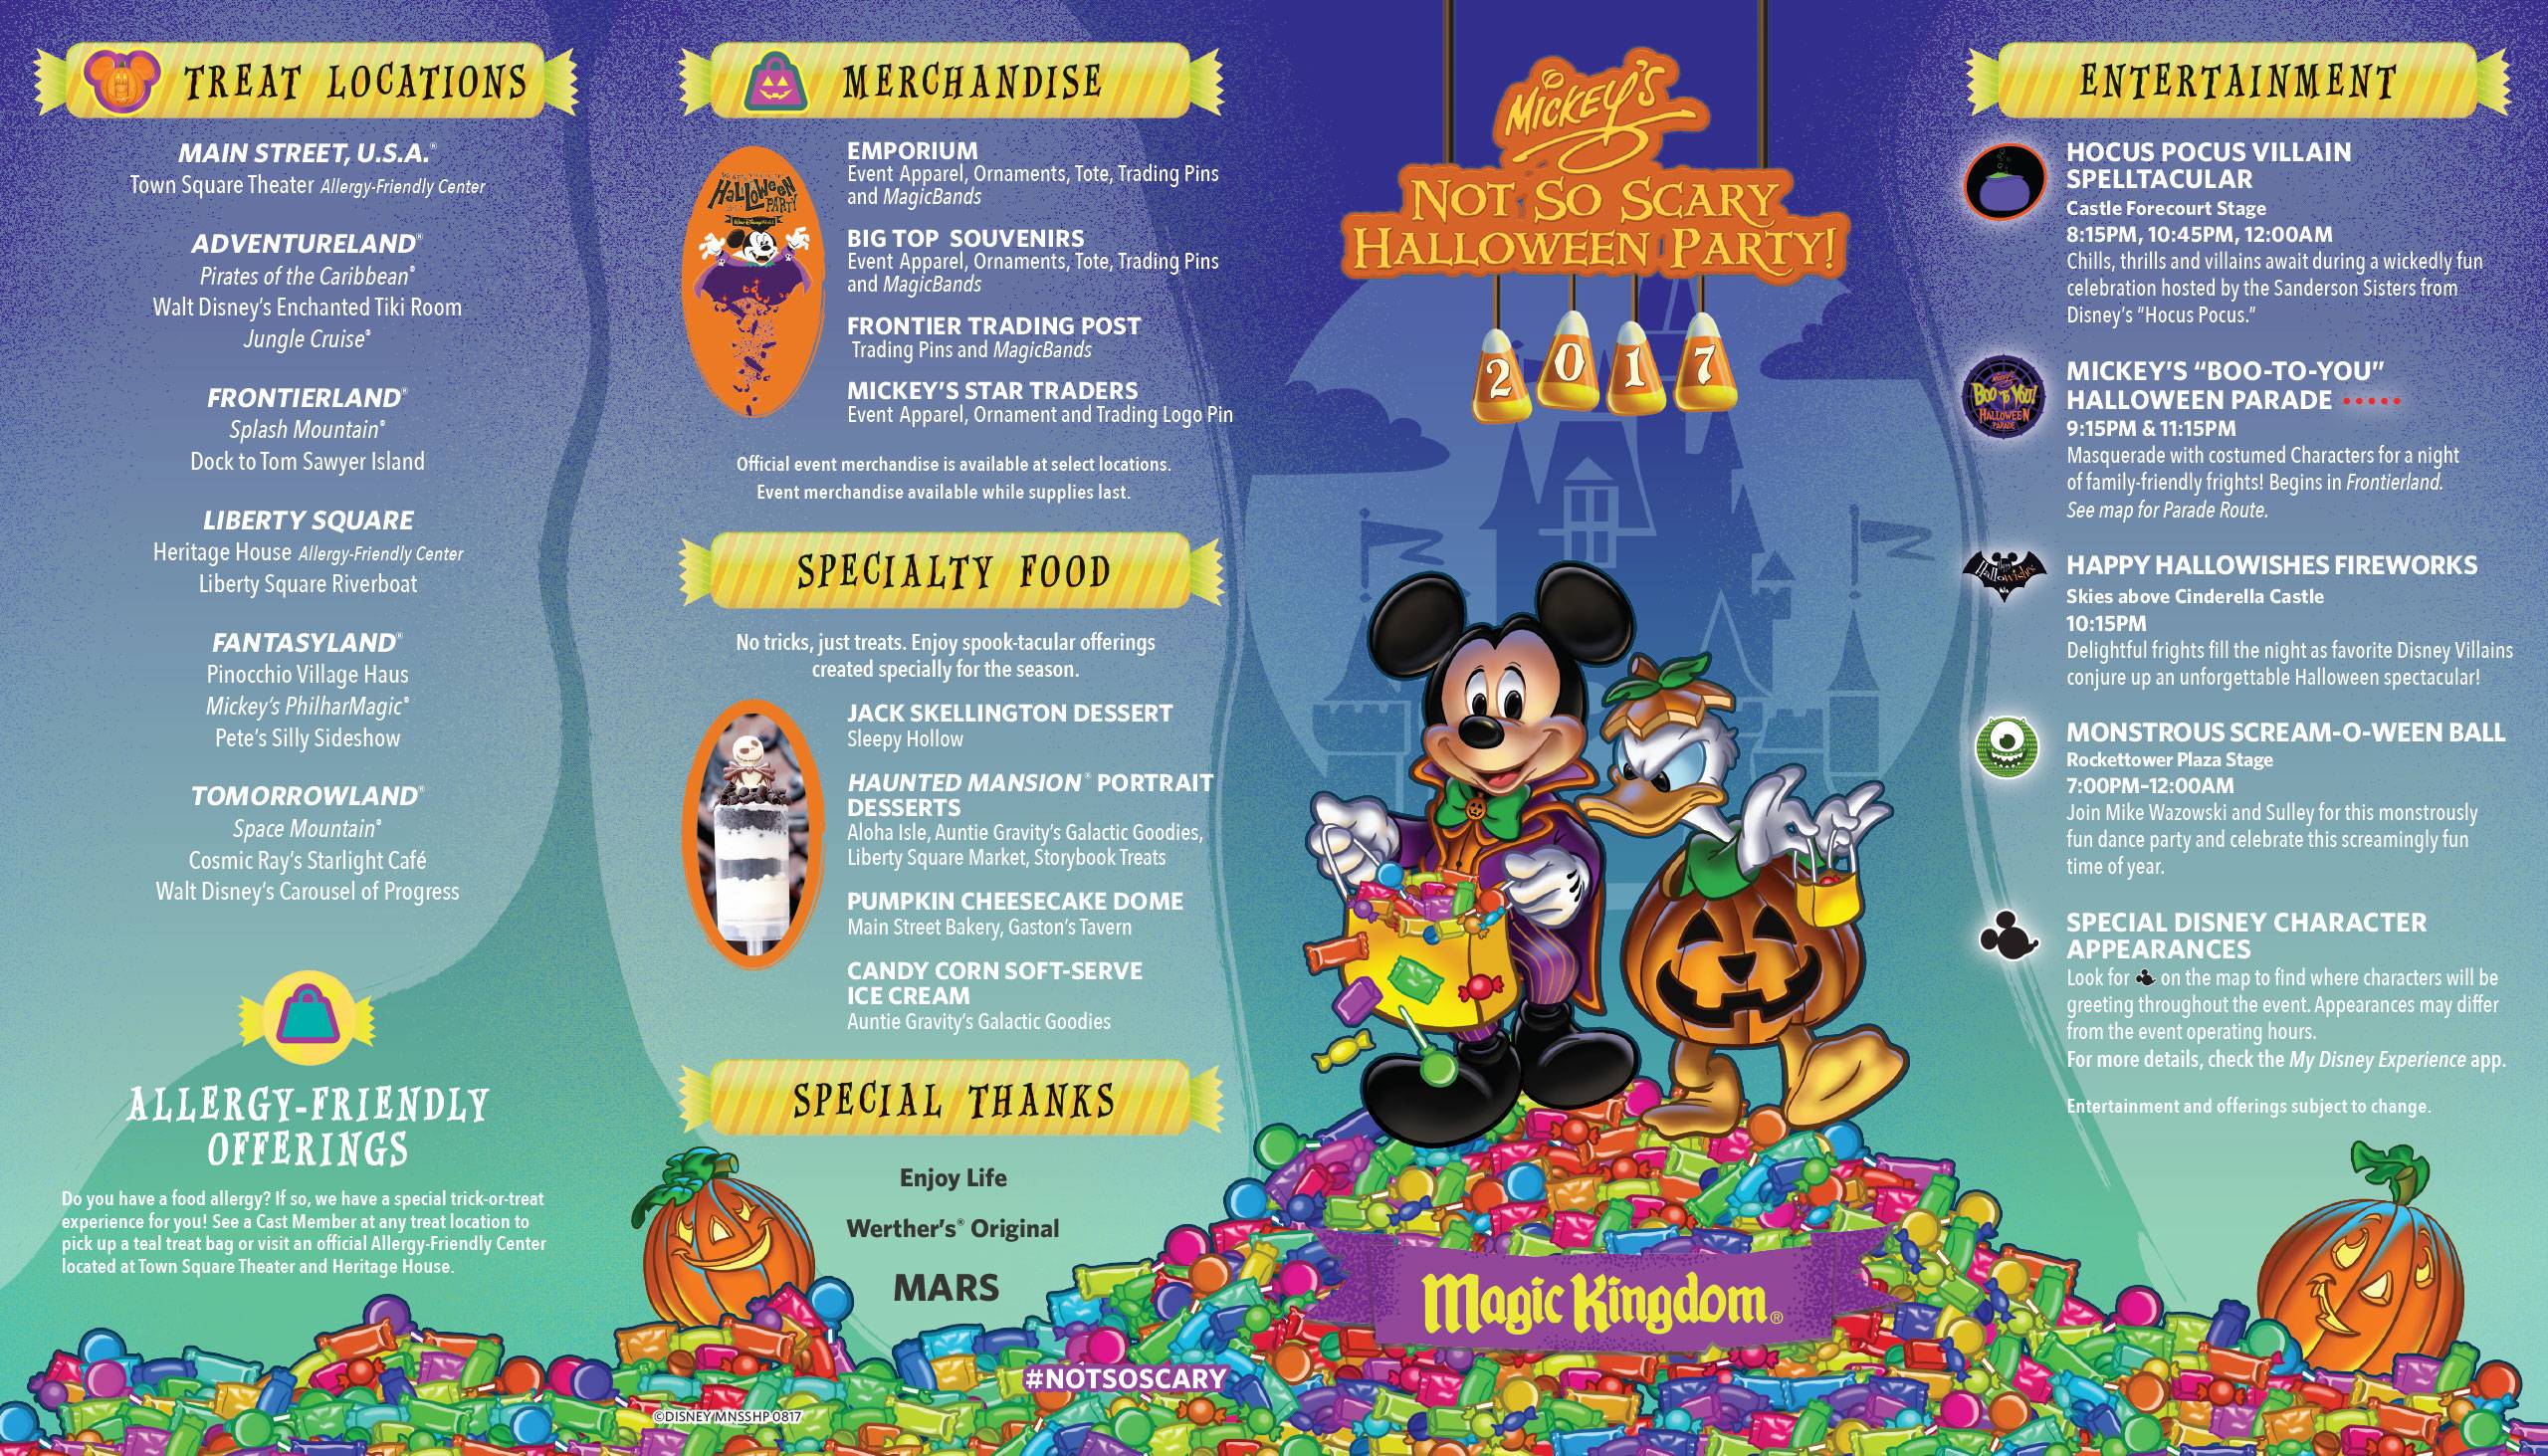 PHOTOS - Guide map for the 2017 Mickey's Not-So-Scary Halloween Party